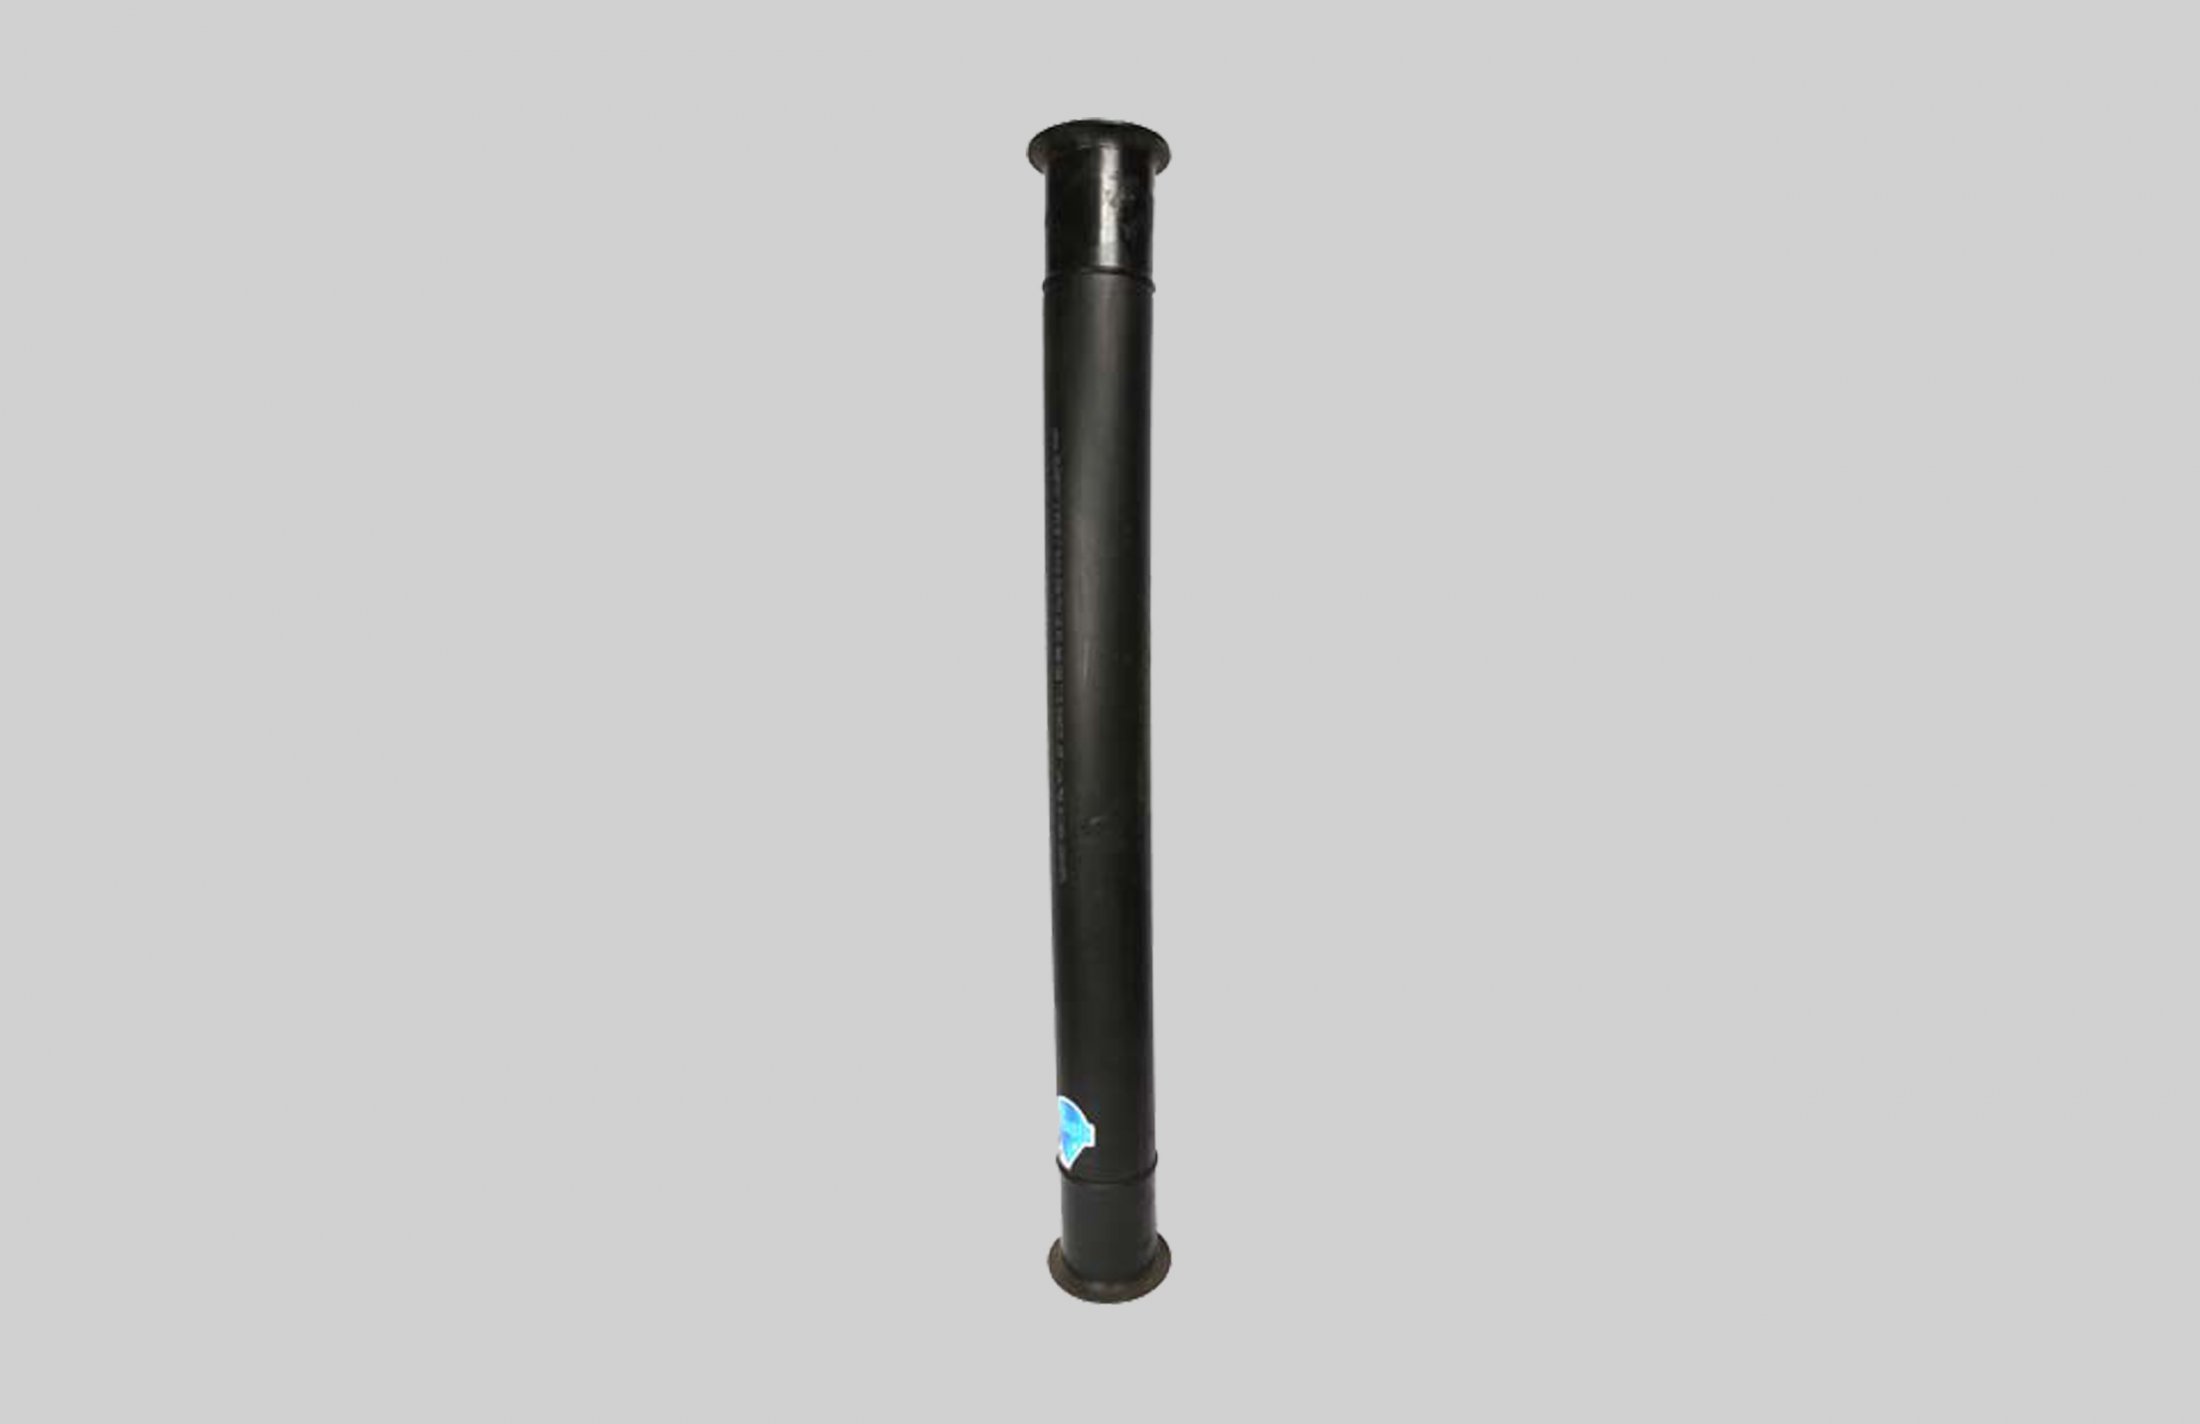 HDPE Polyethylene Plastic Dig Tube/Pipe for Hydro-Excavation